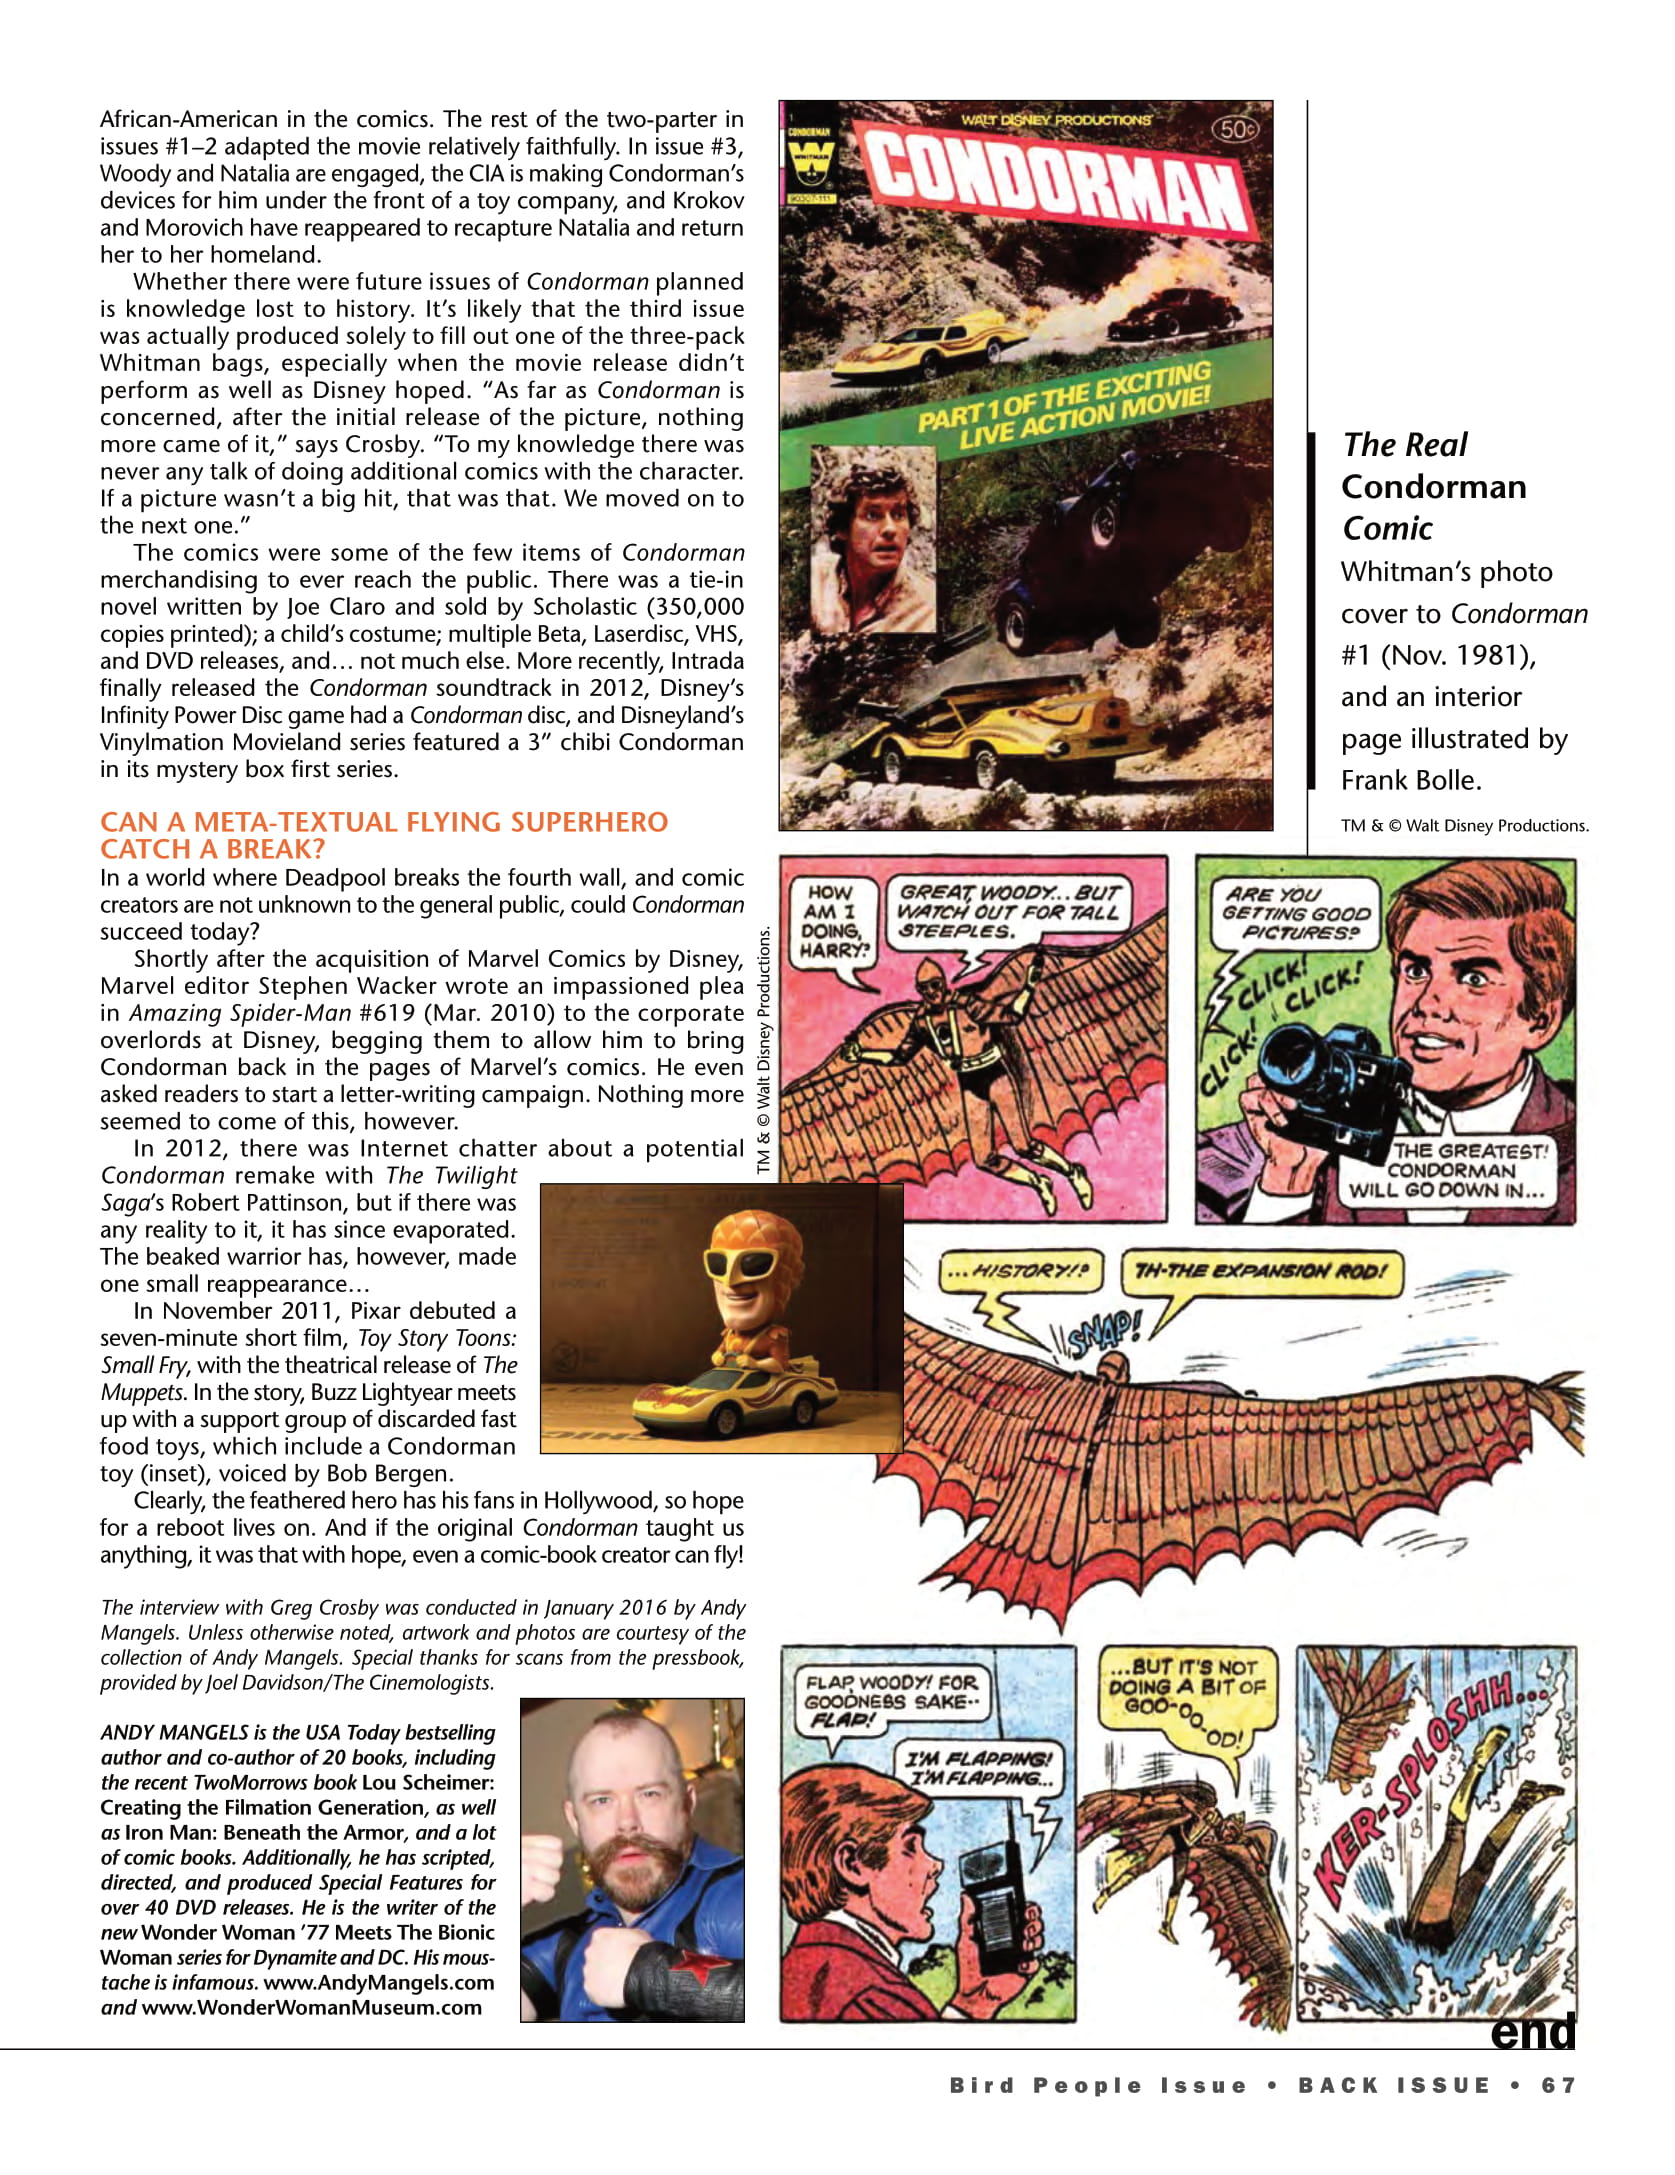 Read online Back Issue comic -  Issue #97 - 69